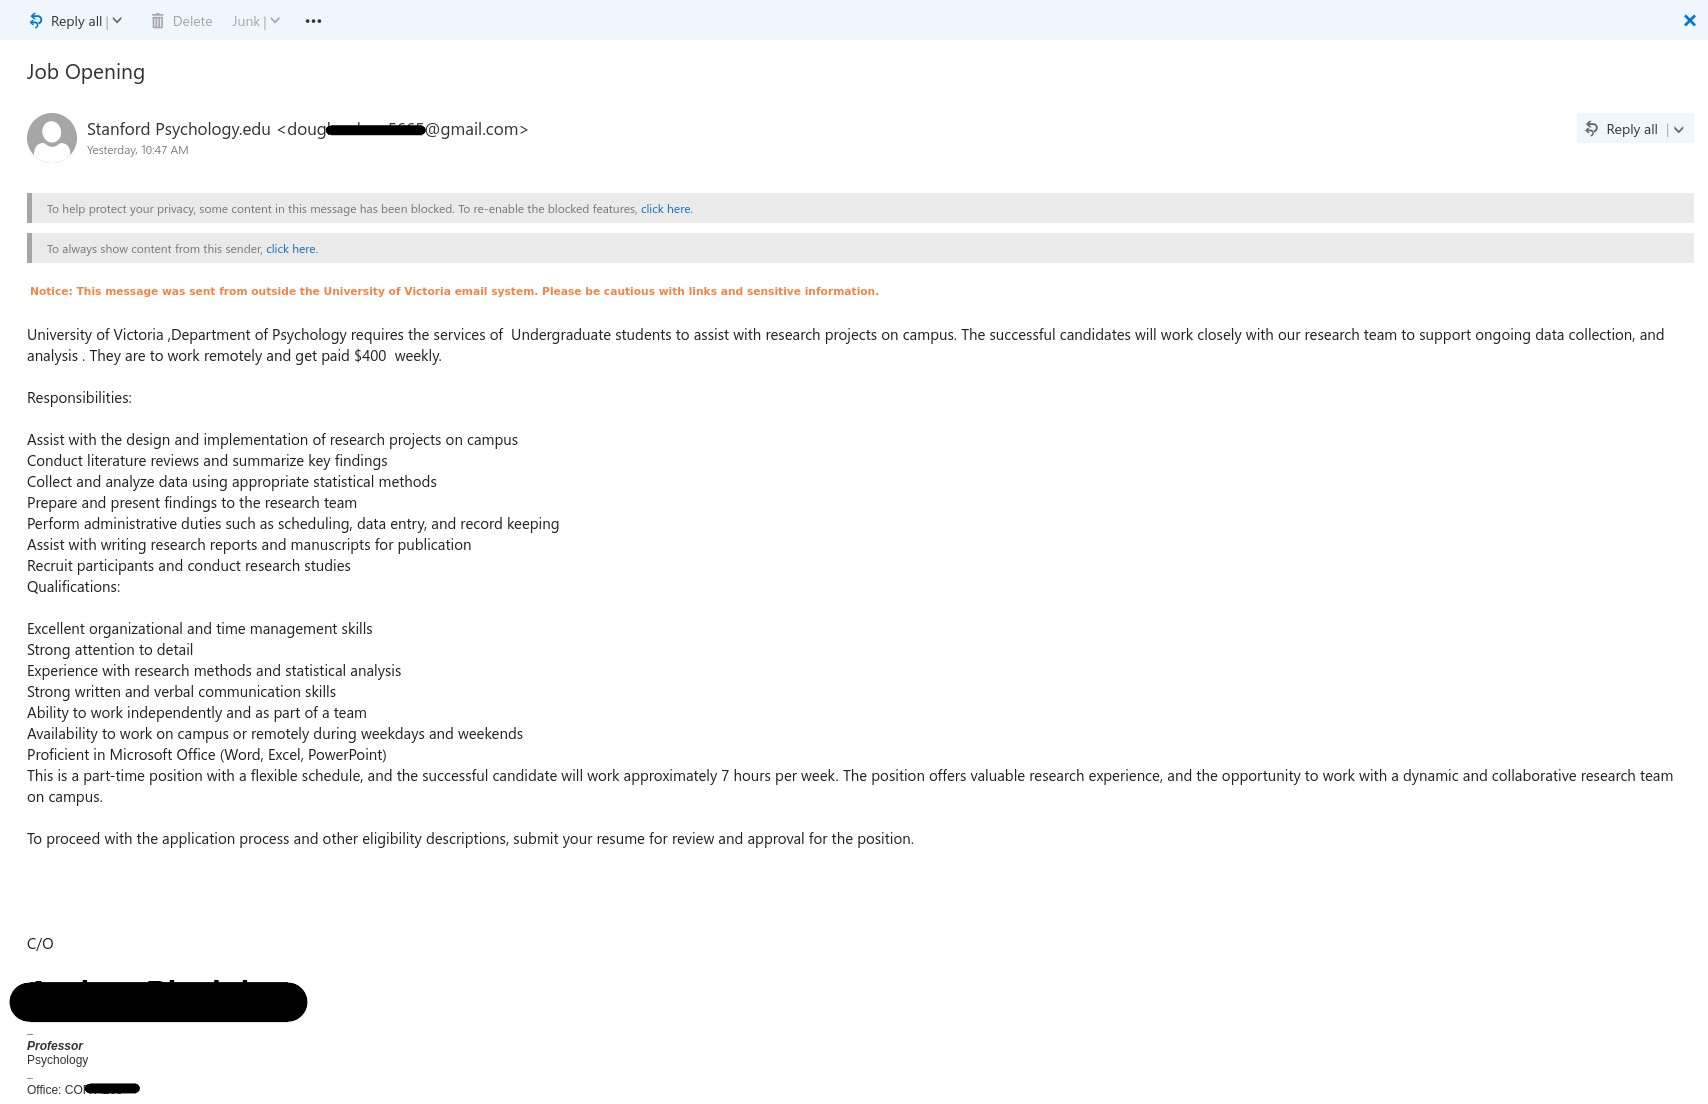 Job scam email impersonating UVic professor with Subject "Job Opening".